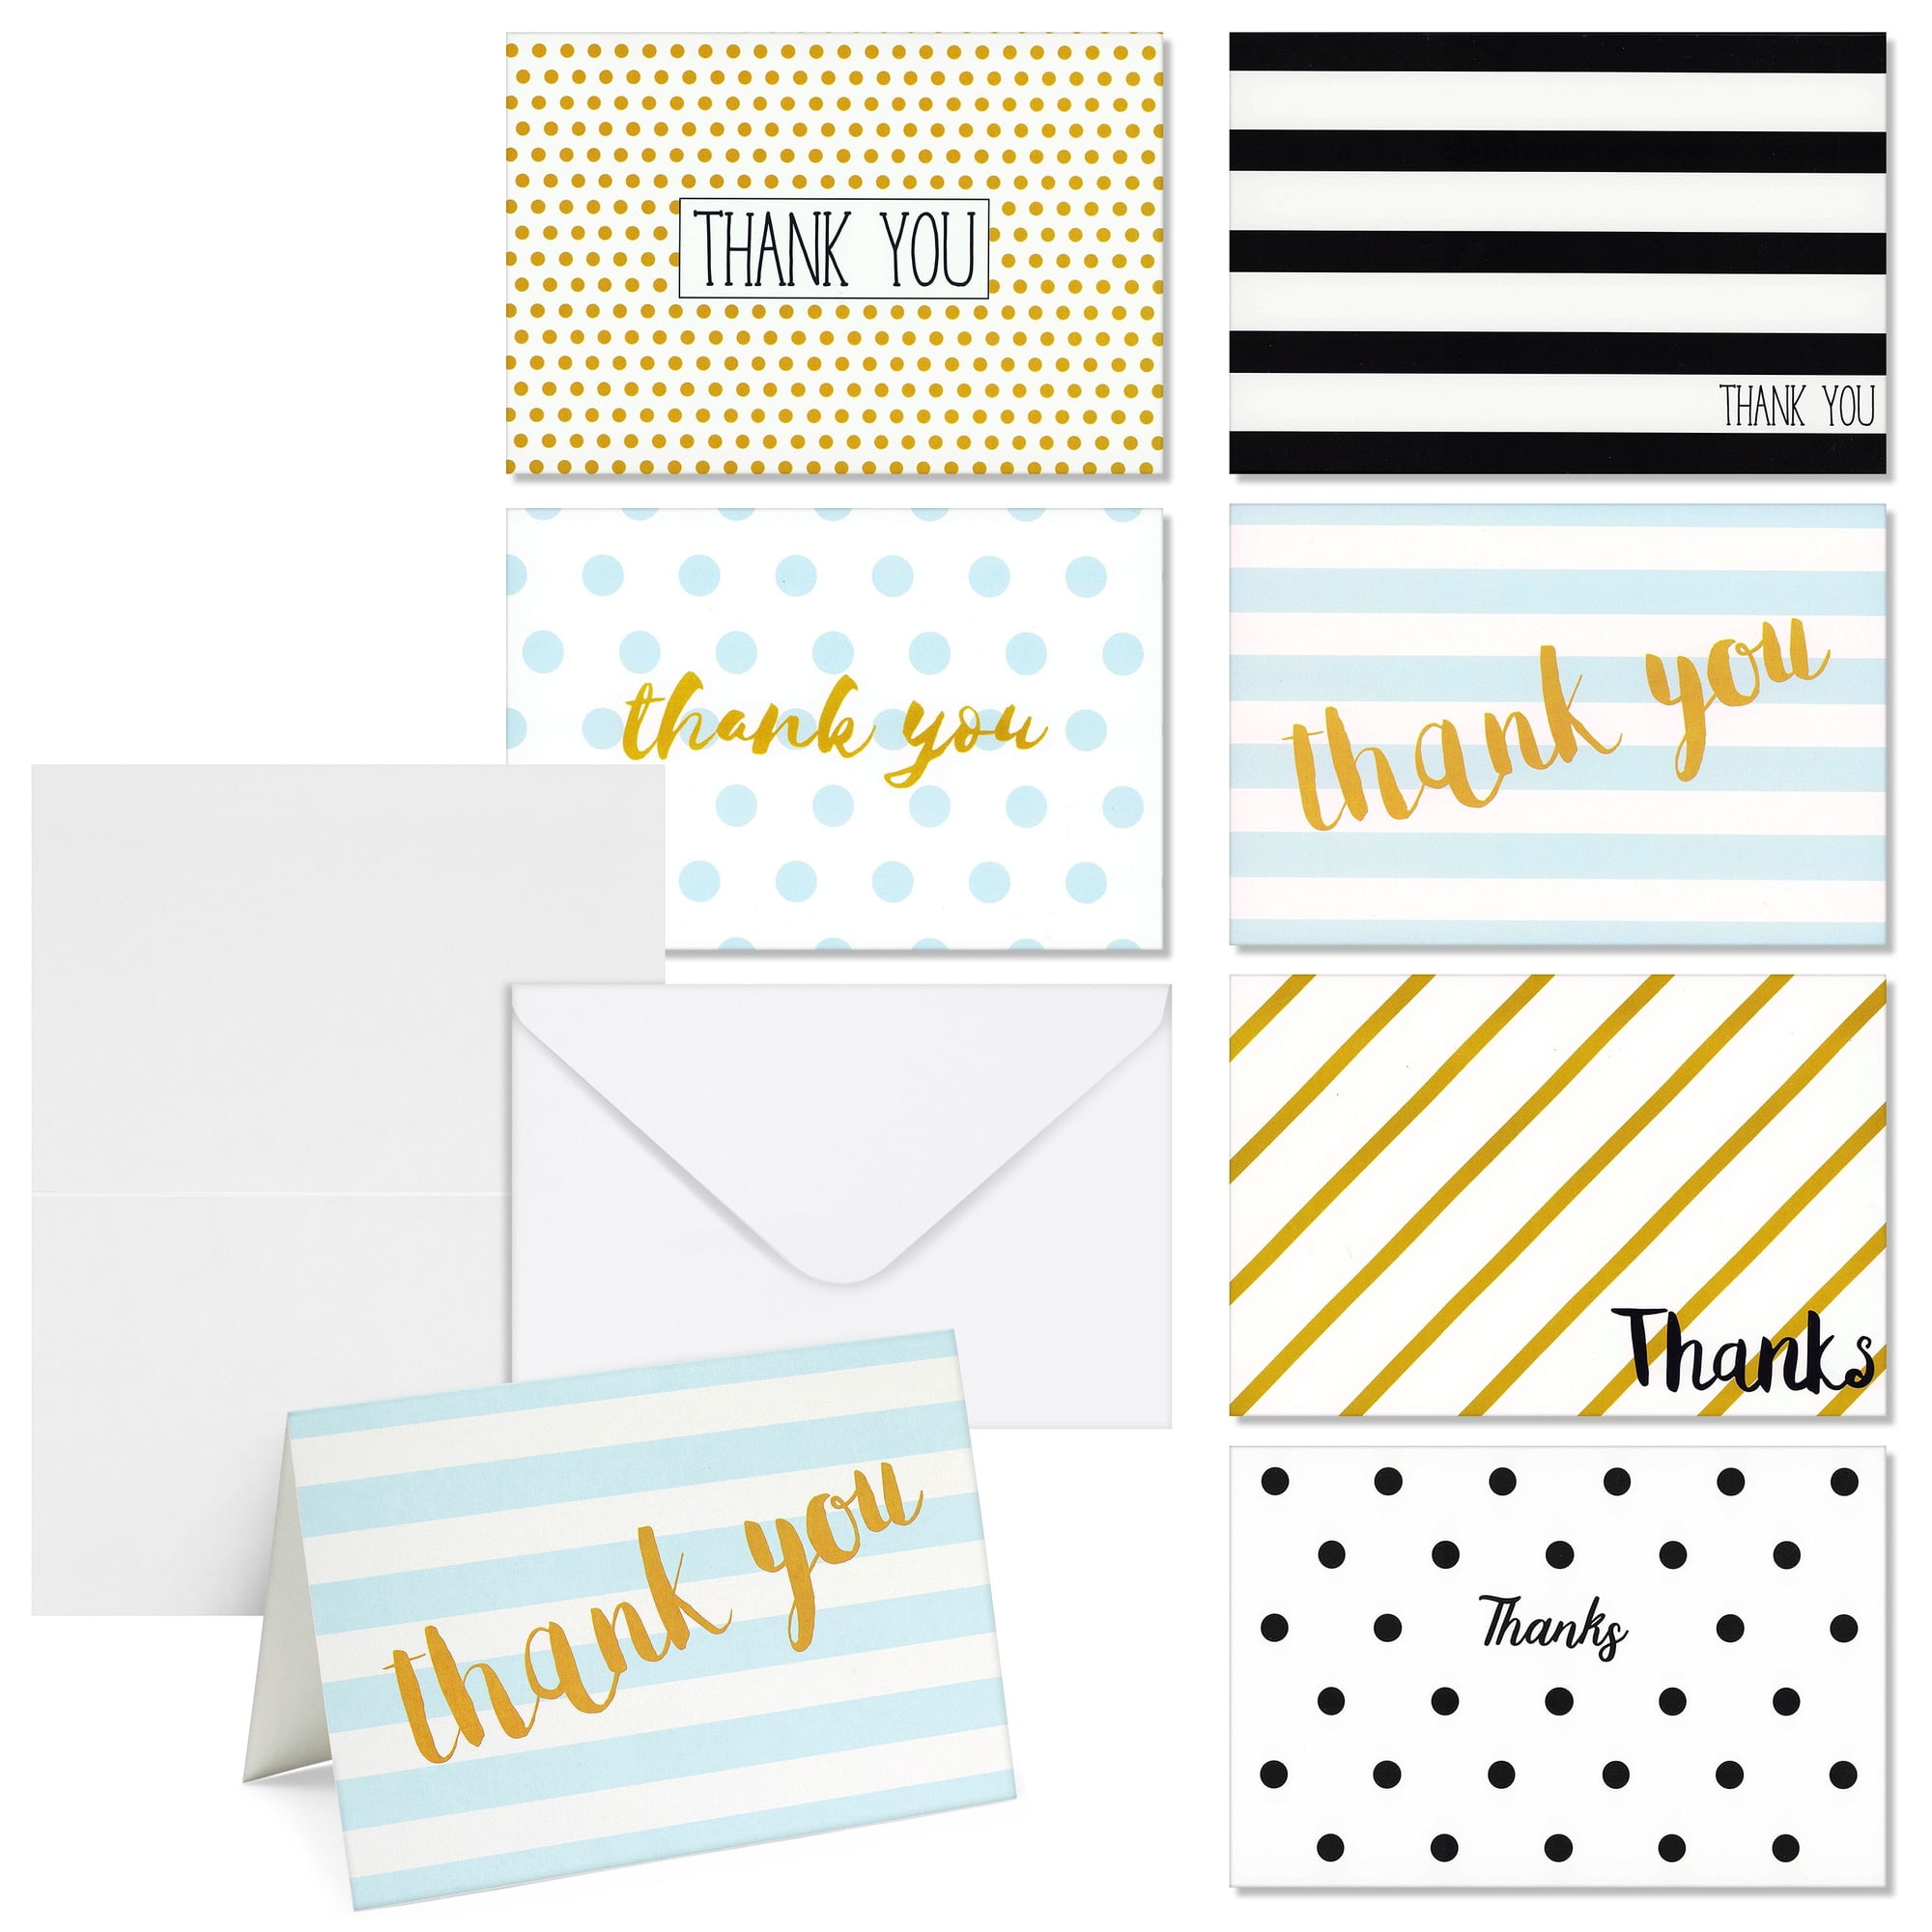 All Occasion Greeting Cards – 144 Pack Blank Note Cards, 6 Colorful Modern  Design, Bulk Box Set Variety Pack, Blank cards with Envelopes, 4 x 6 Inches